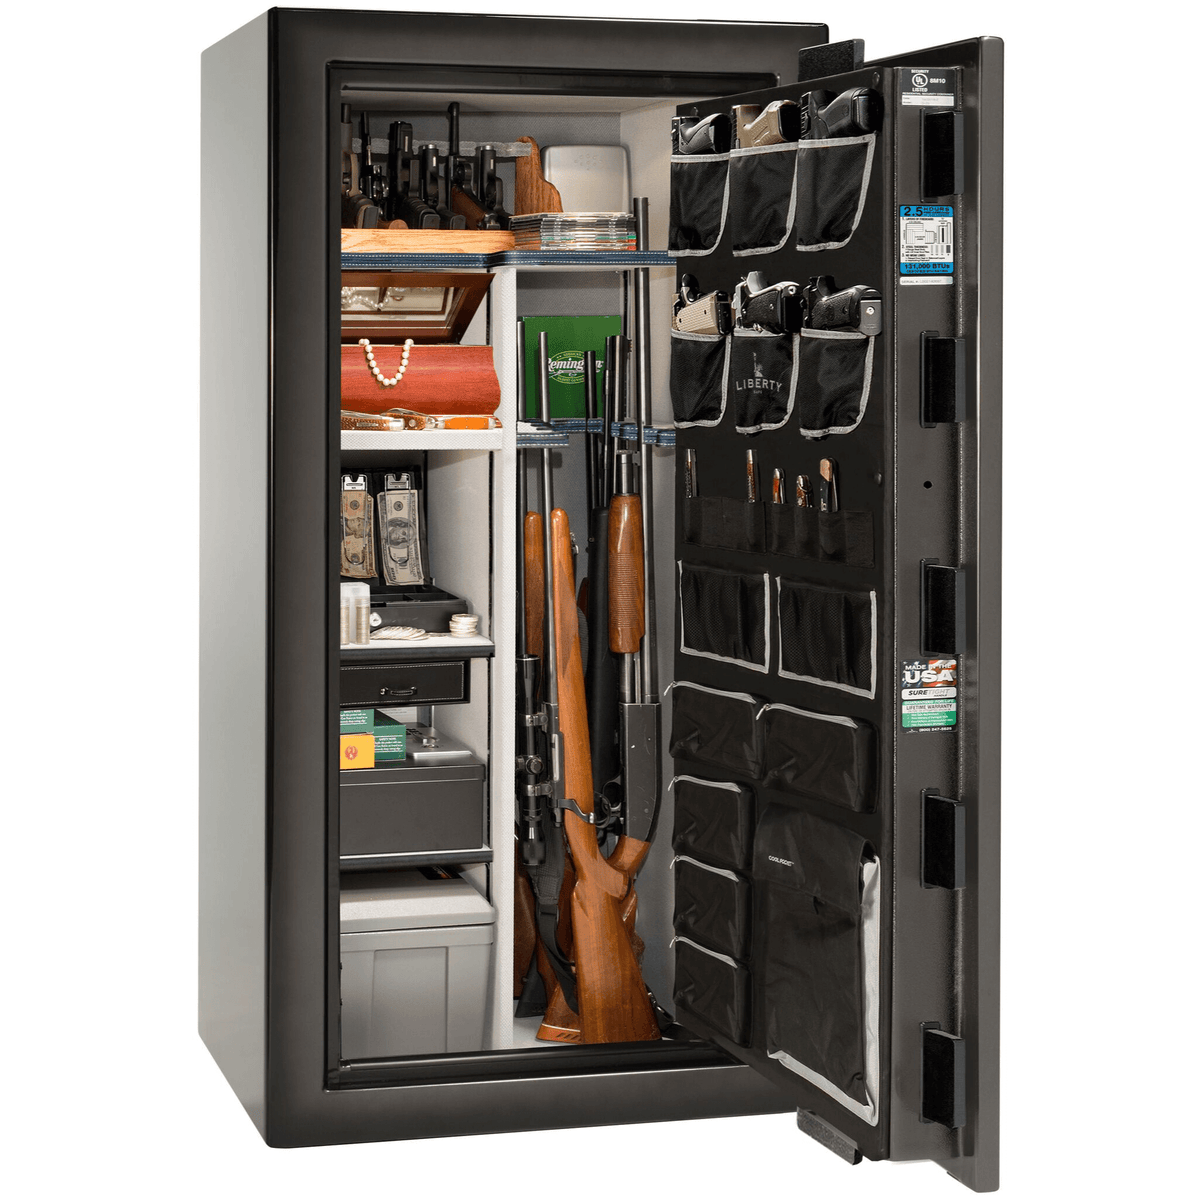 Liberty Safe National Magnum 25 in Gray Charcoal Feathered Edge Gloss, open door.